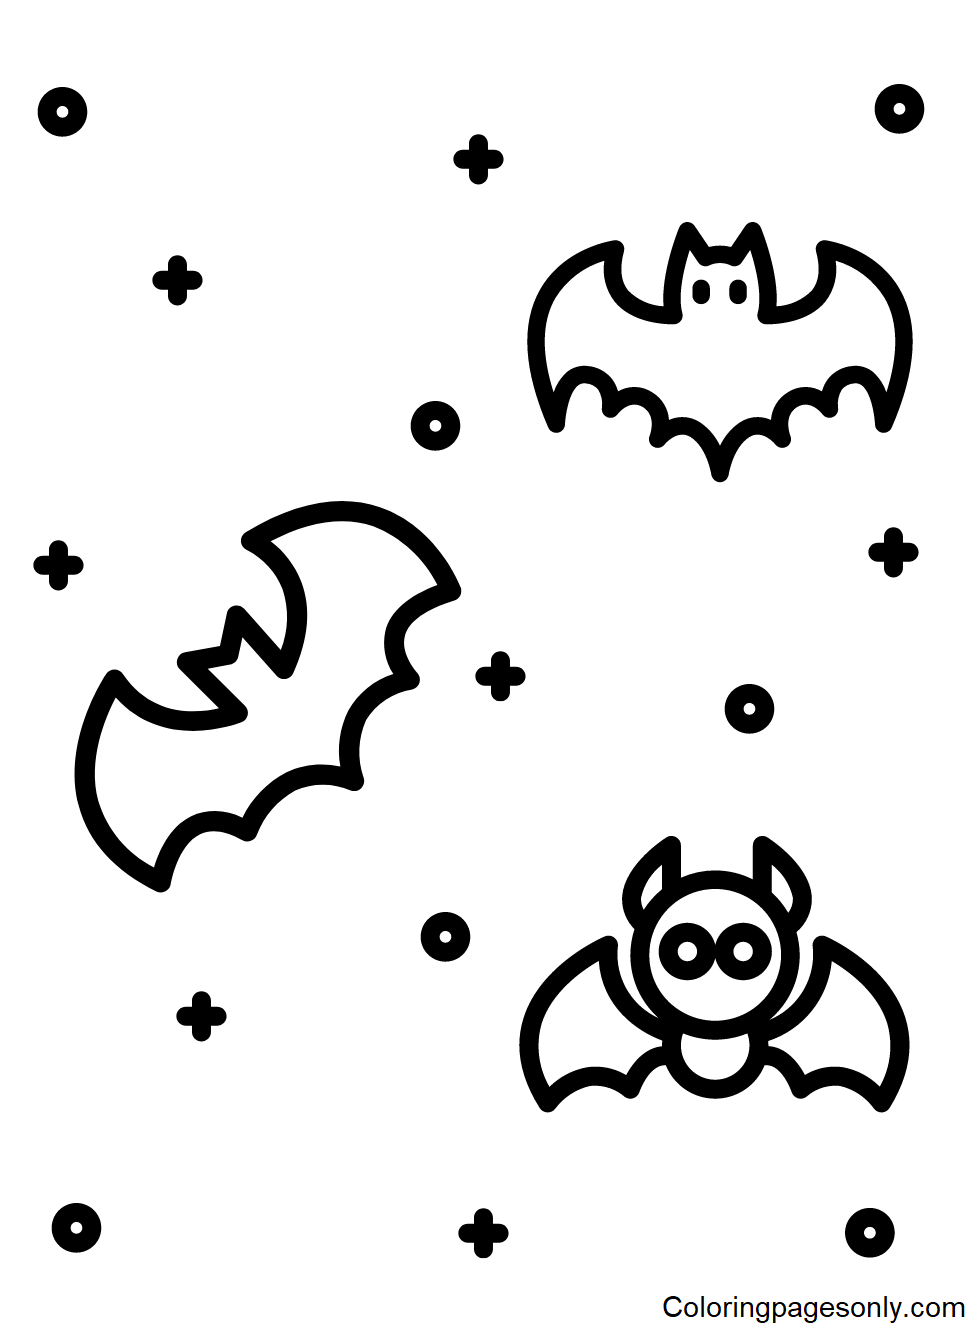 Three Bats for Kids Coloring Pages